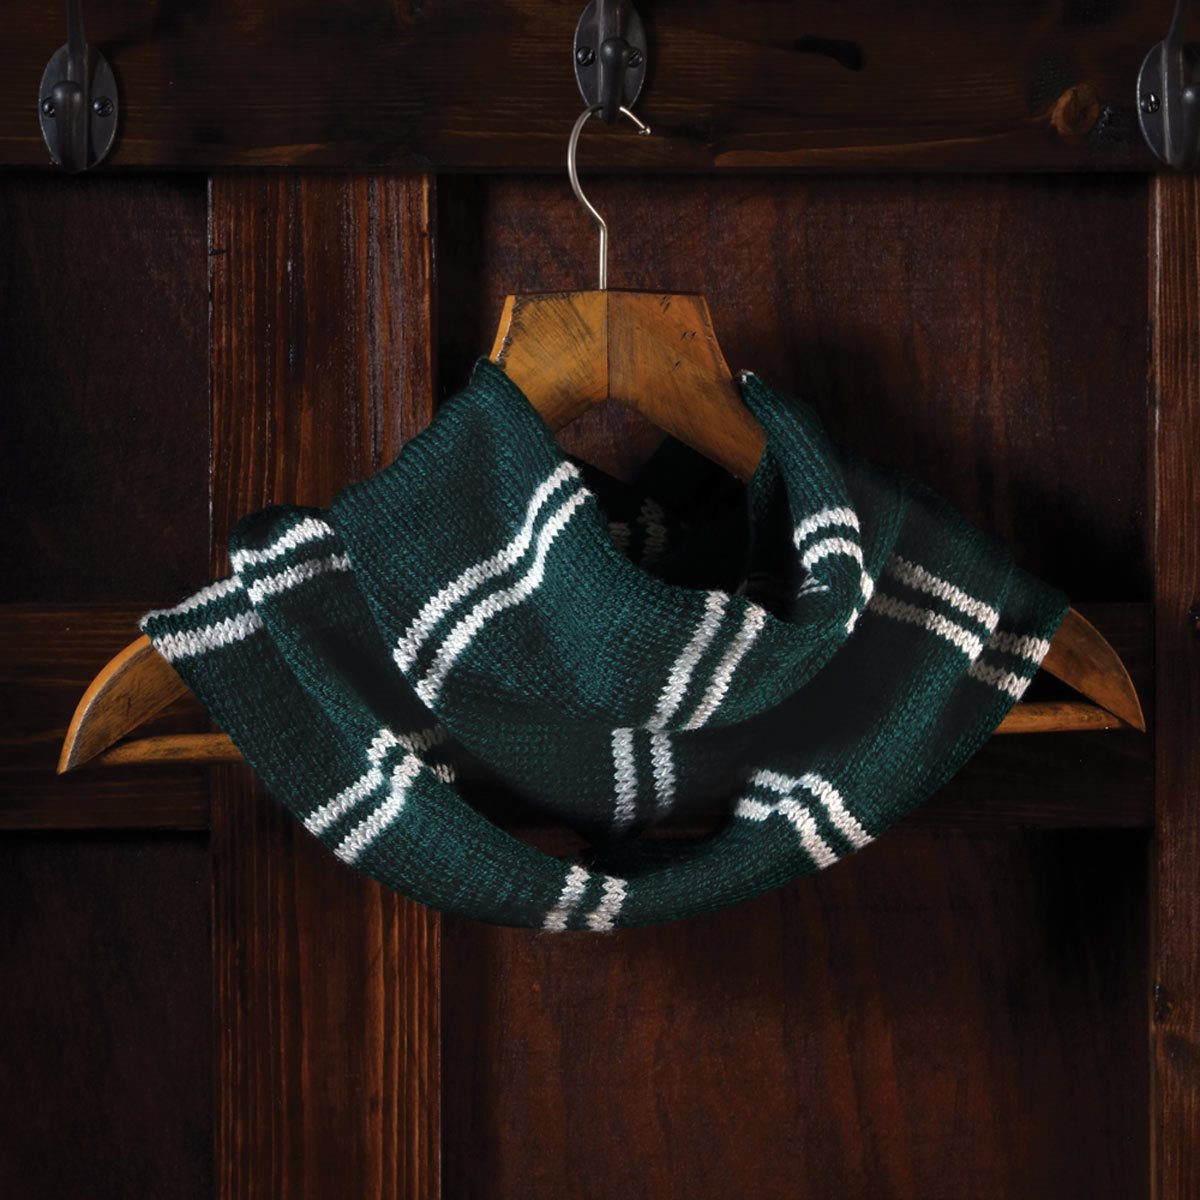 AUG212470 - HP WIZARDING WORLD KNIT KIT RAVENCLAW HOUSE SNOOD - Previews  World